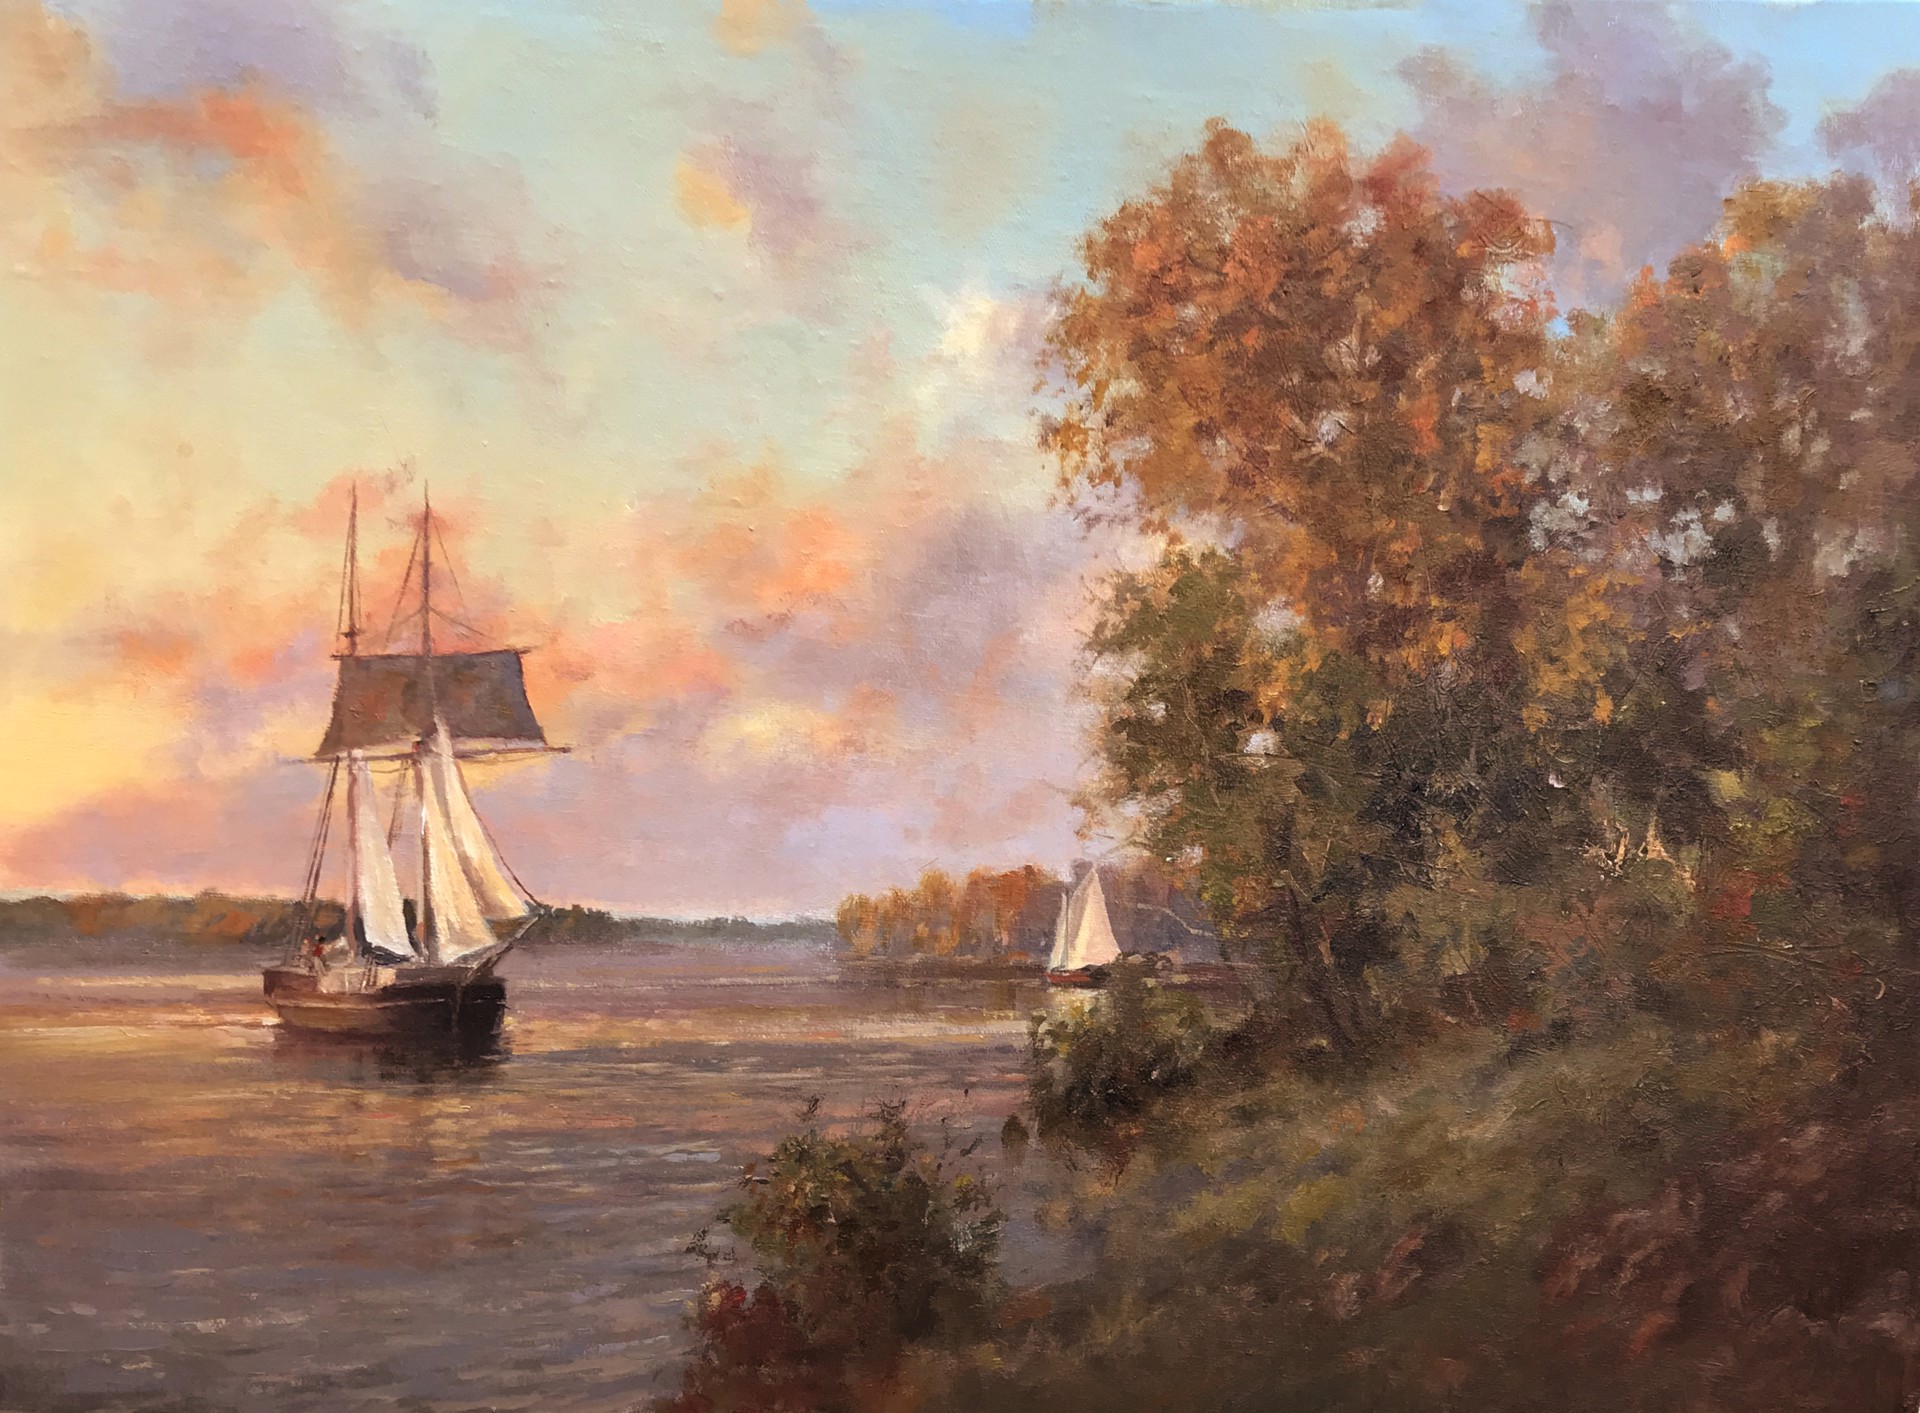 Morning on the CT River, 1858 by Paul Beebe